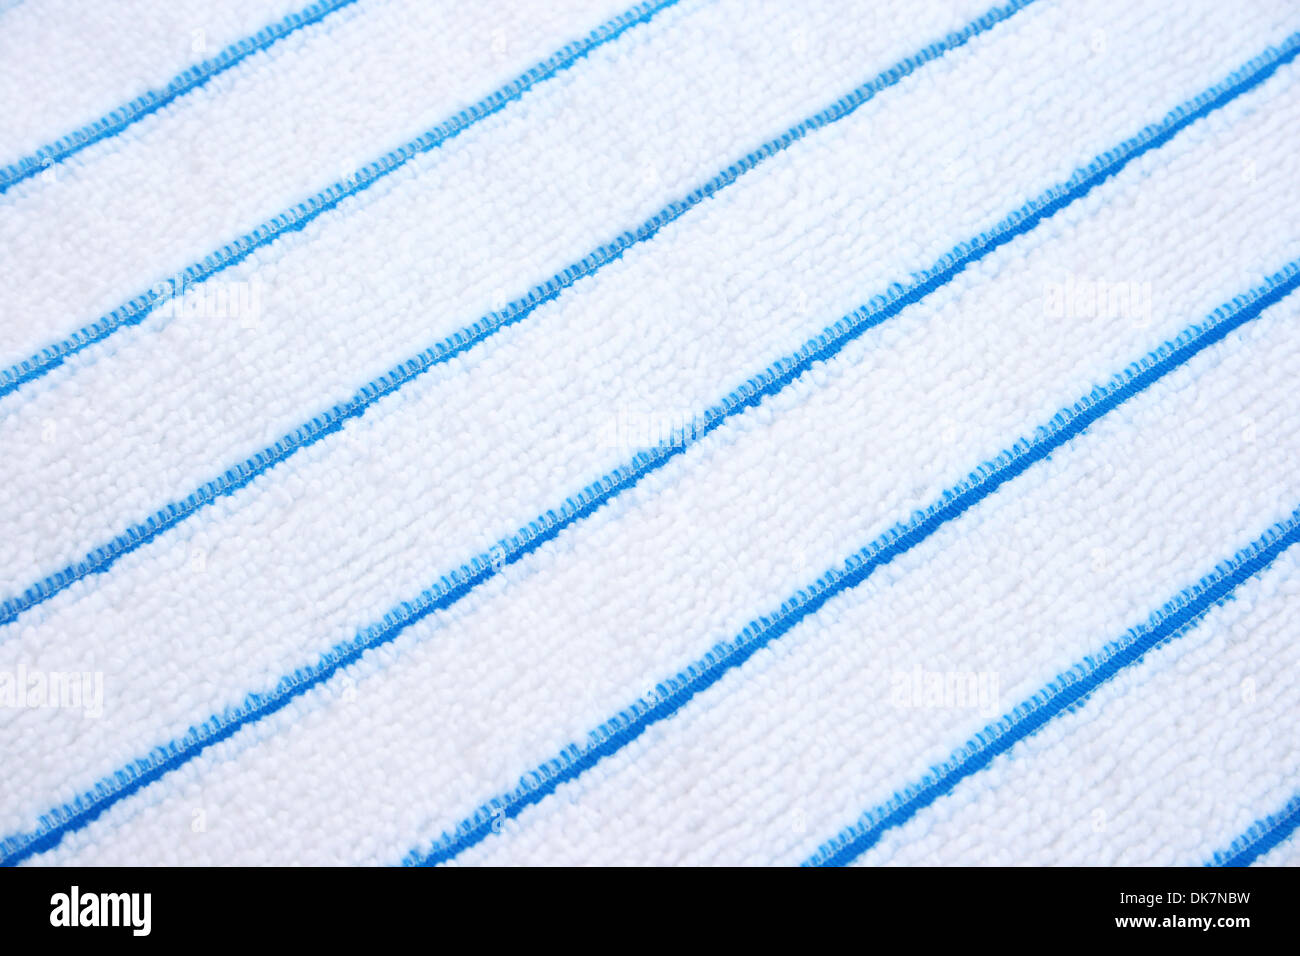 Texture of cotton fabric as abstract background. Stock Photo